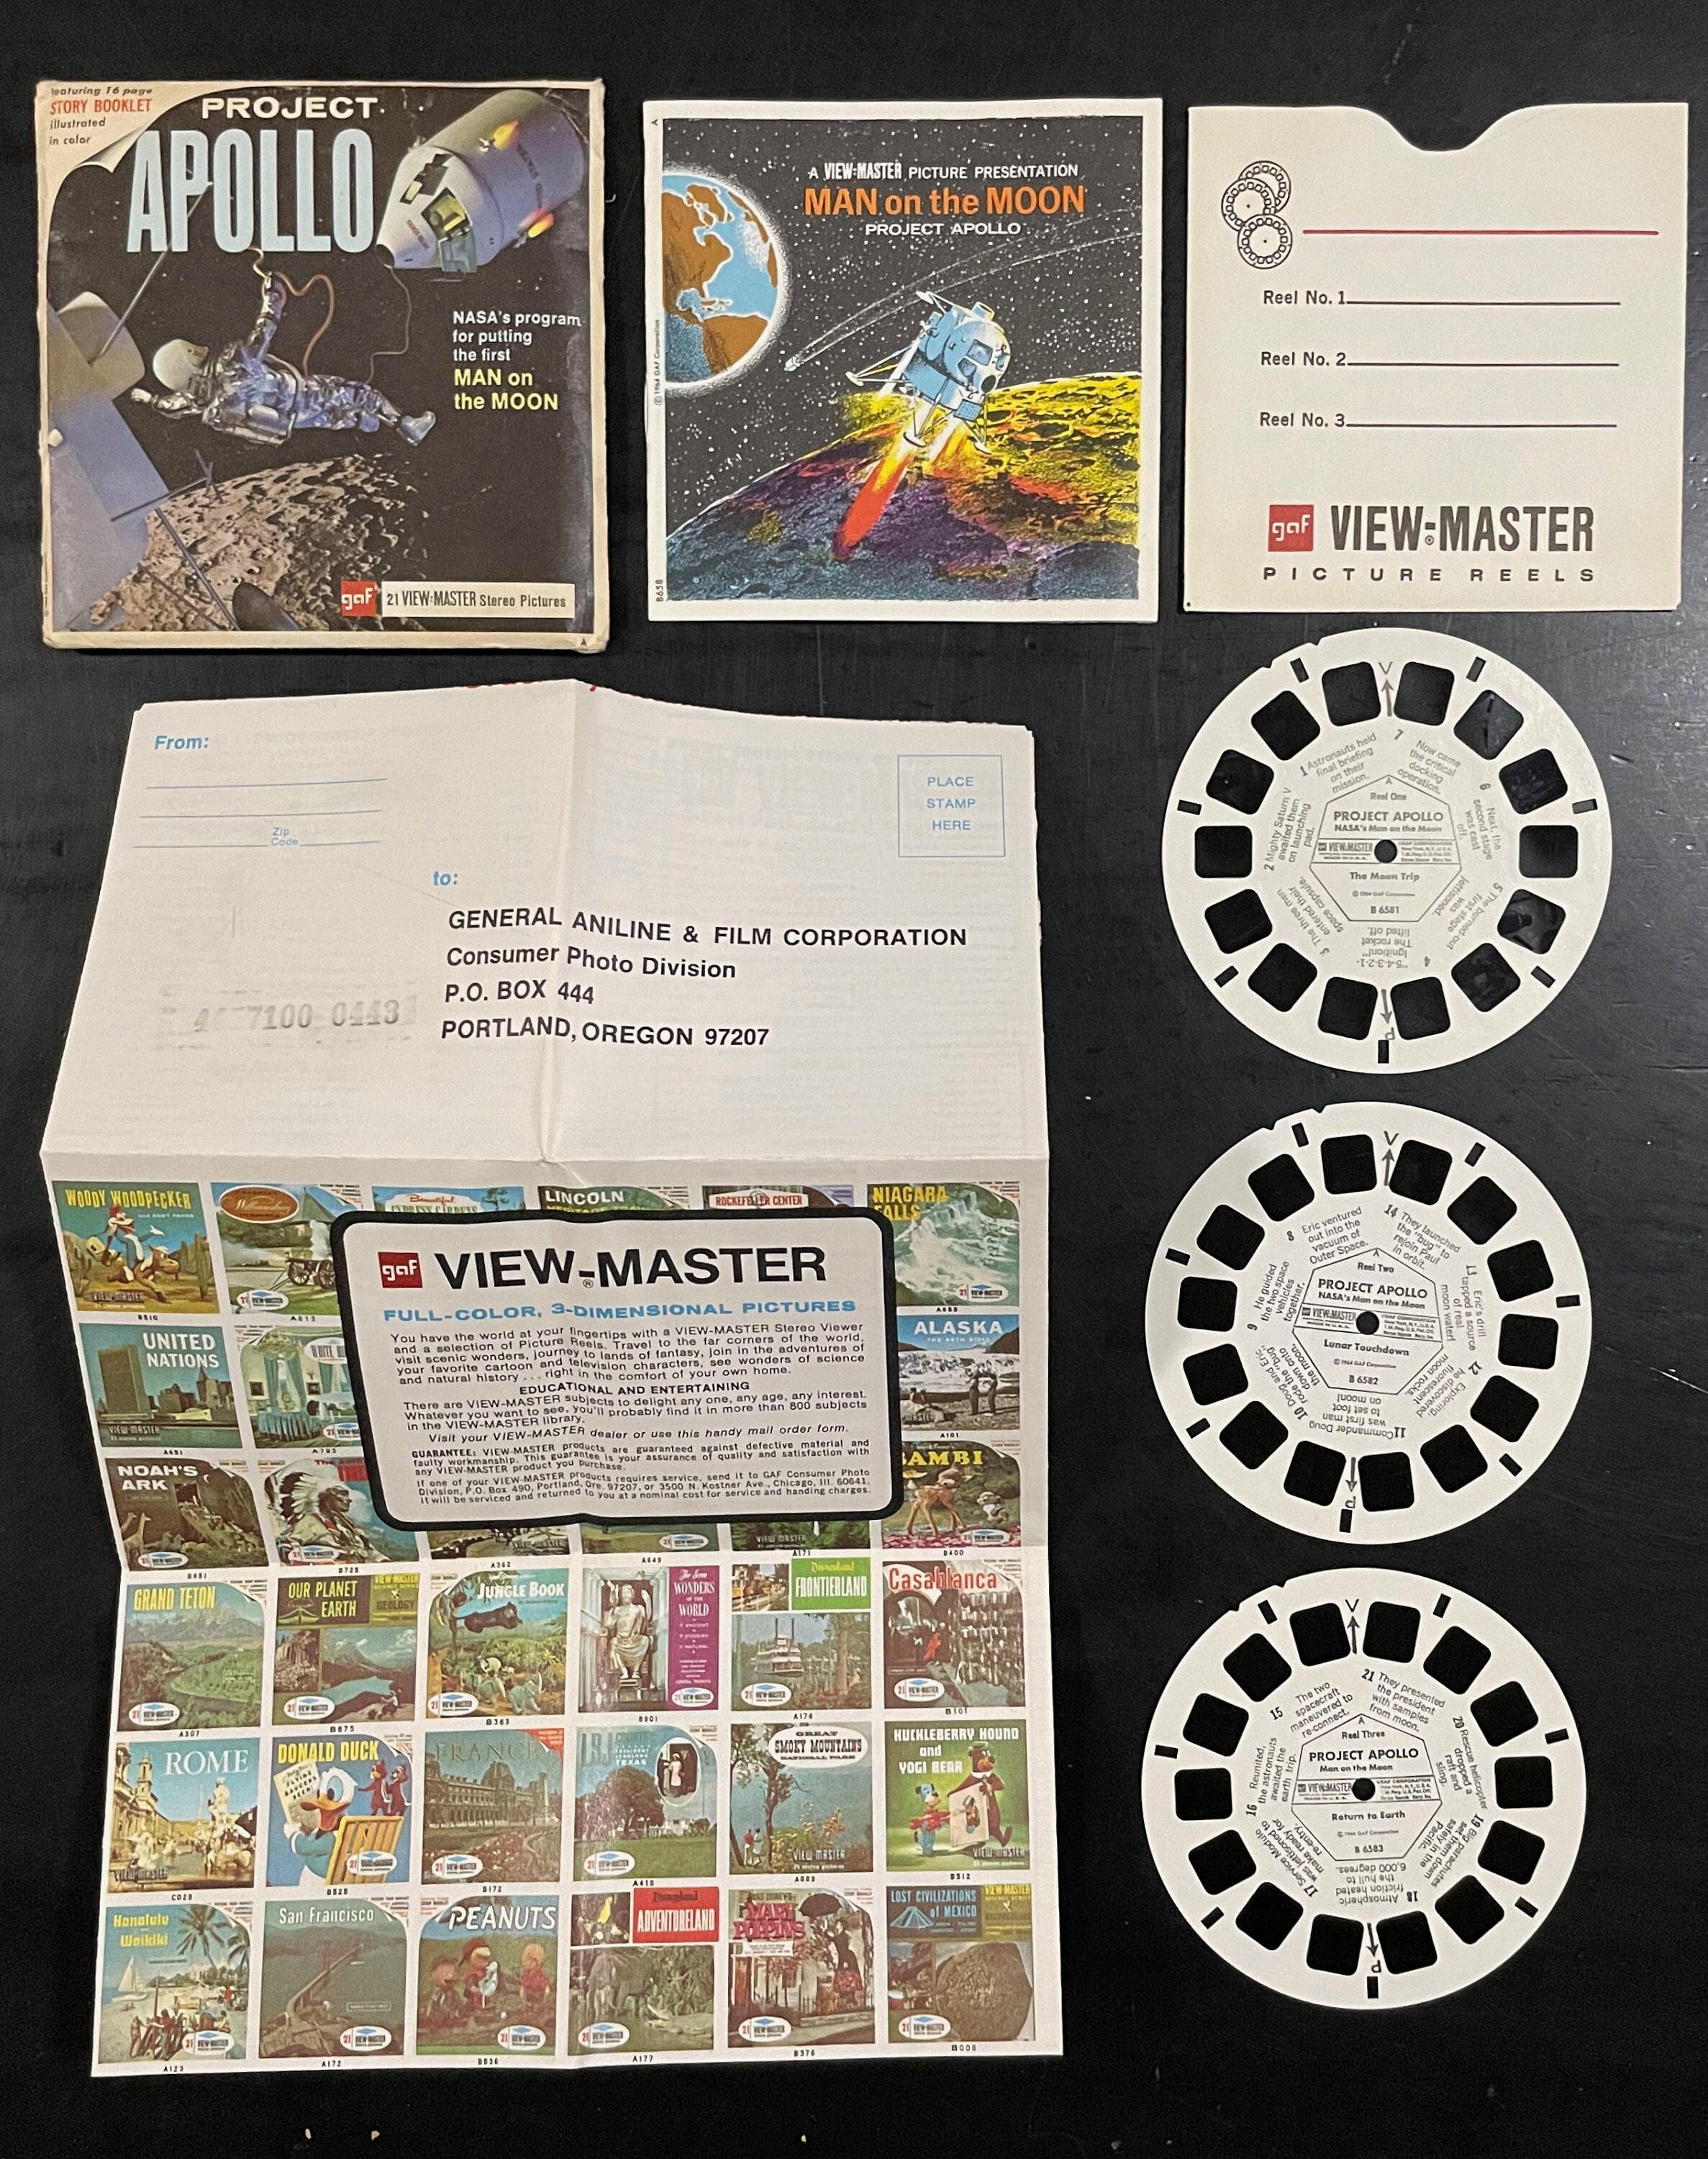 Project Apollo 21 View-master Stereo Pictures 3 Reels, Packet No. B 658,  Nasa's Program for Putting the First Man on the Moon, 1964 